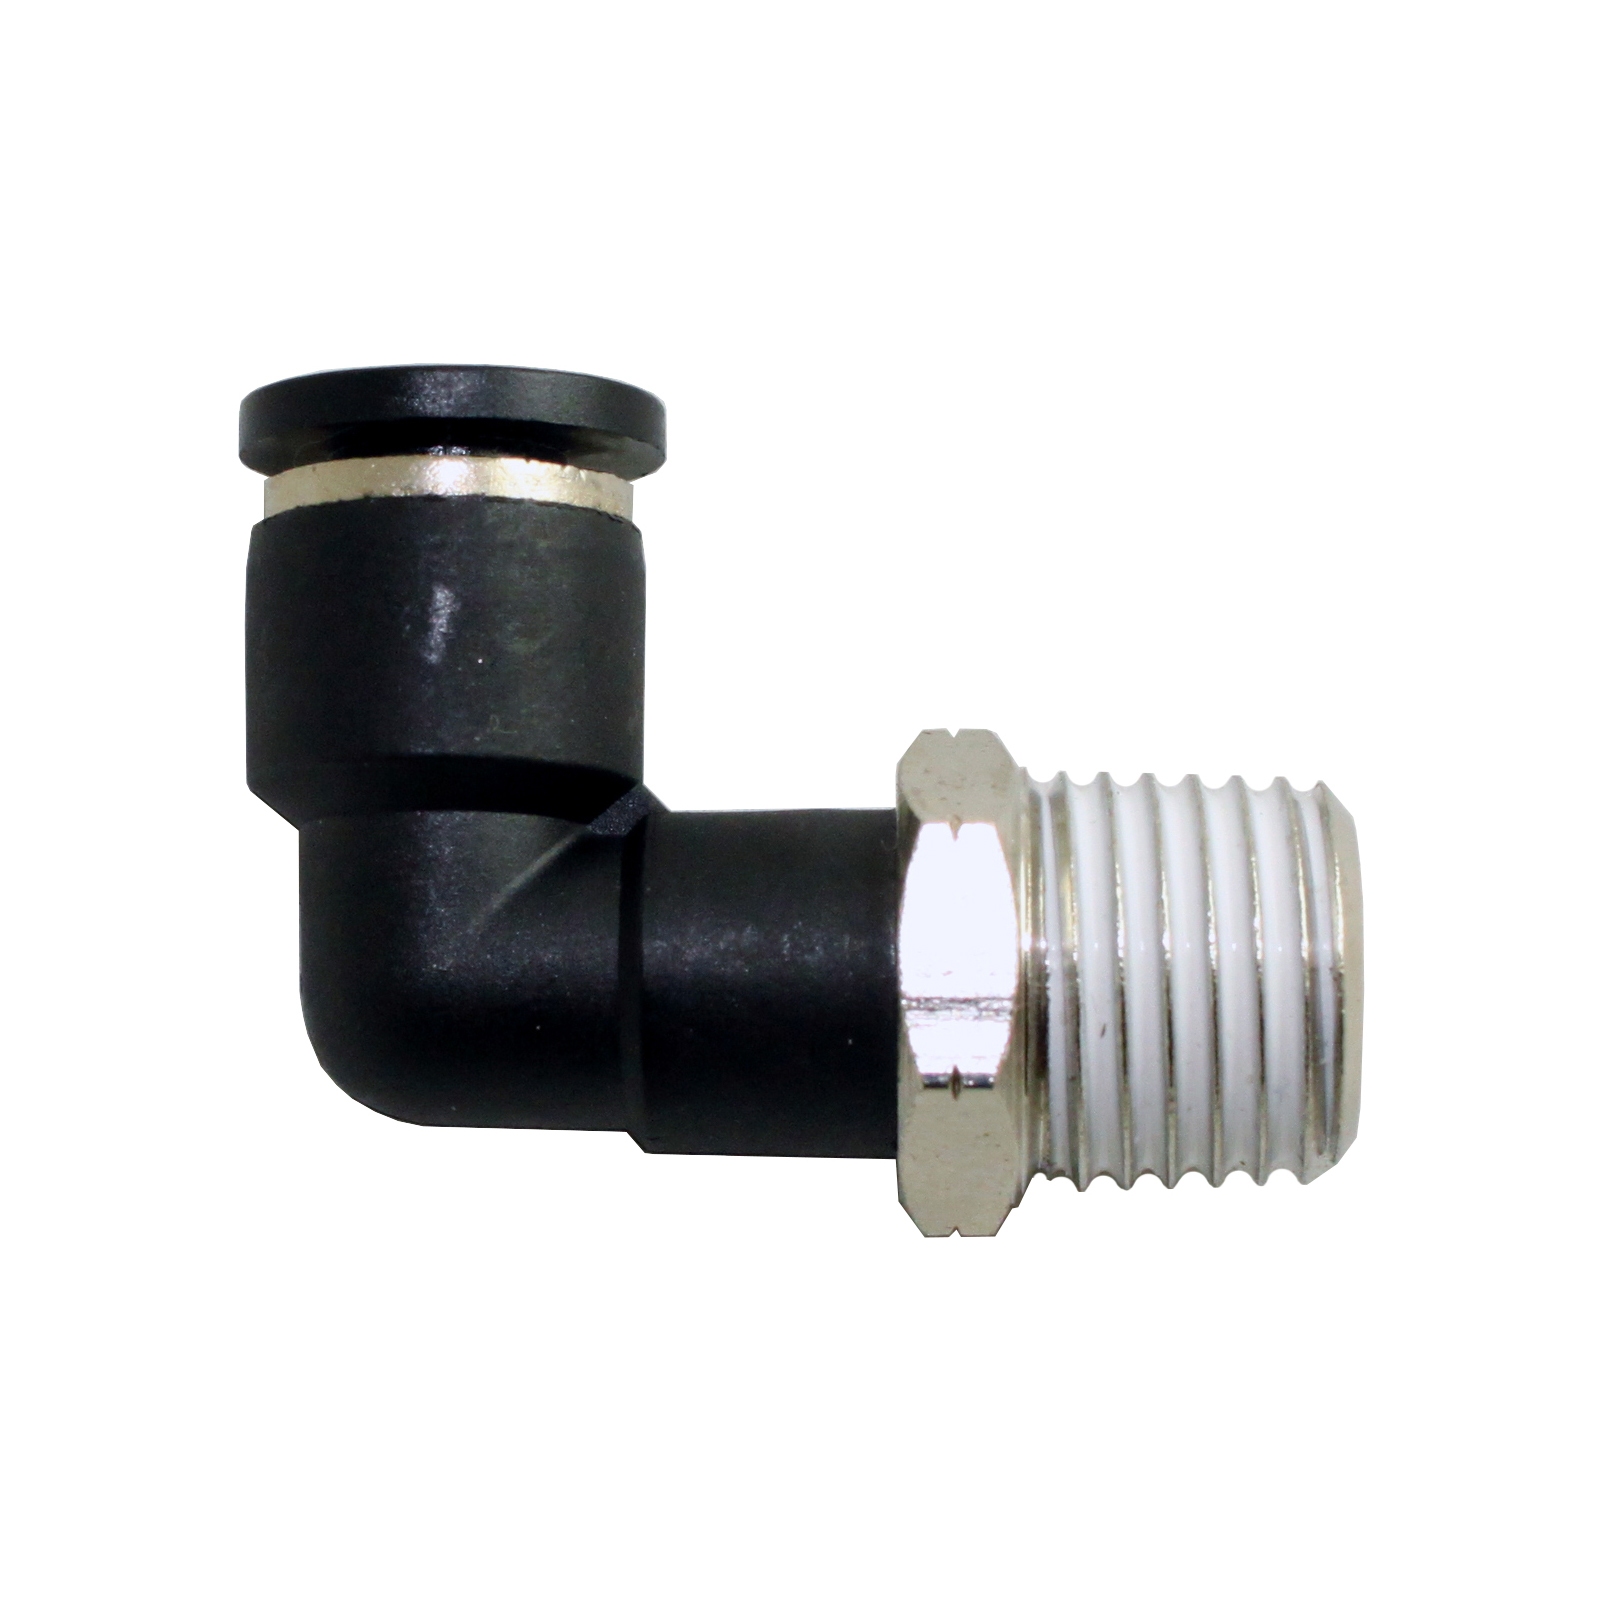 Plastic Straight Union Pipe Tube Fitting Straight Pneumatic Connector Fits for Tube OD: 1/4 8mm 30PCS Push to Connect Tube Fitting 5/16 3/8 10mm 6mm 